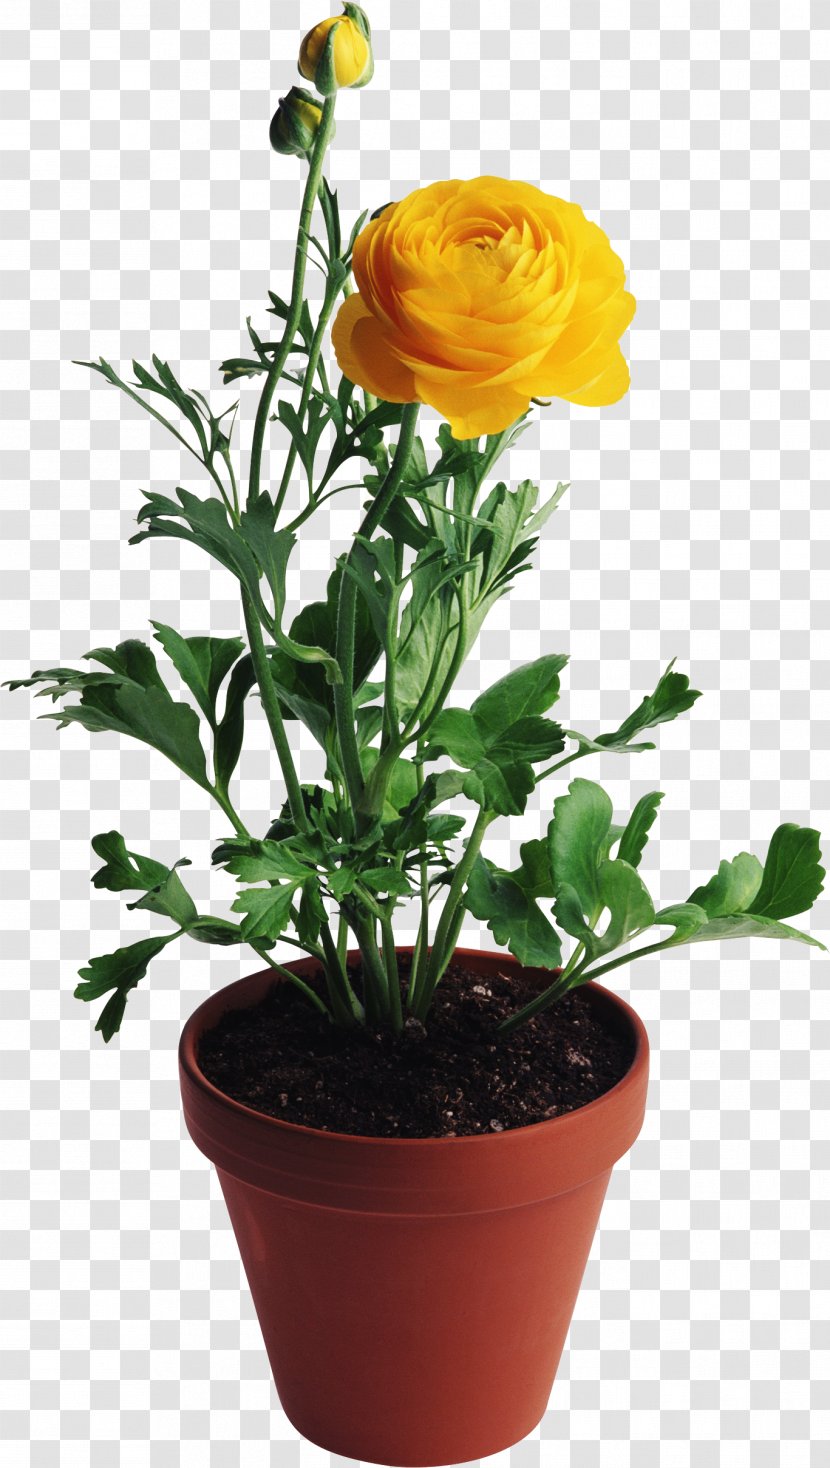 Flower Vase Rose Yellow - Houseplant - Potted Plant Transparent PNG